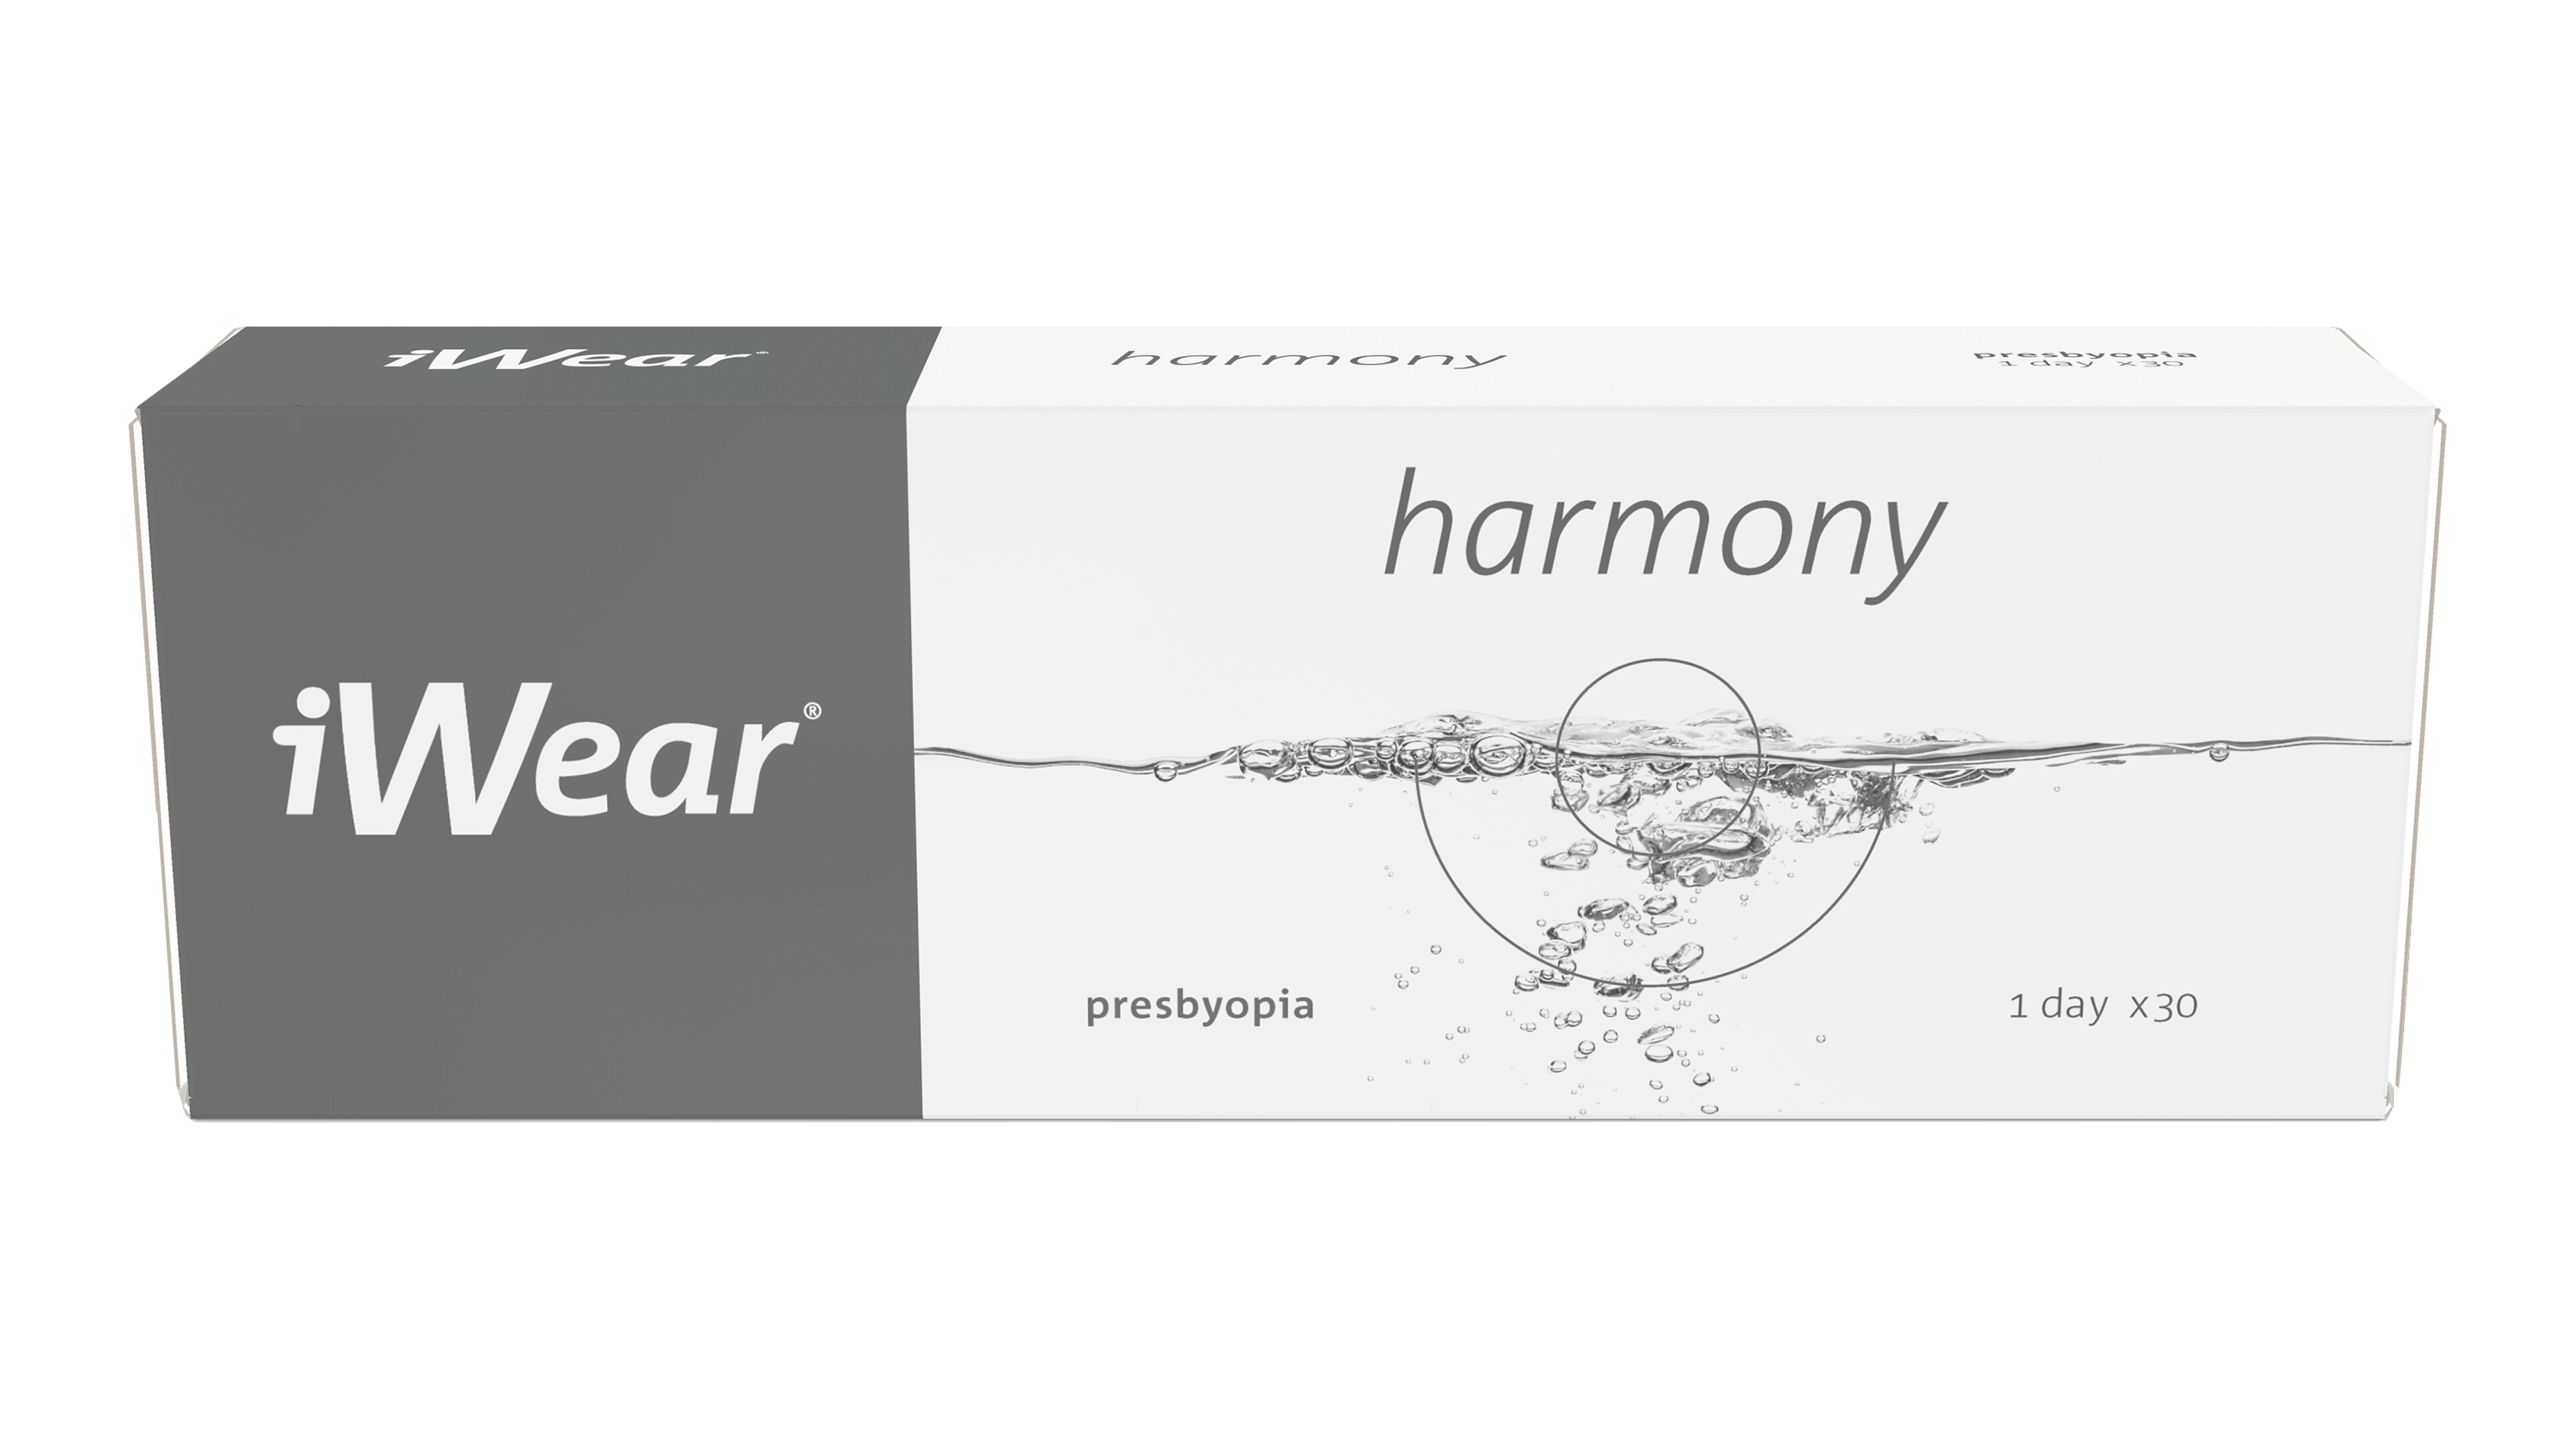 Front iWear® iWear harmony presbyopia Tageslinsen Tageslinsen 30 Linsen pro Packung, pro Auge